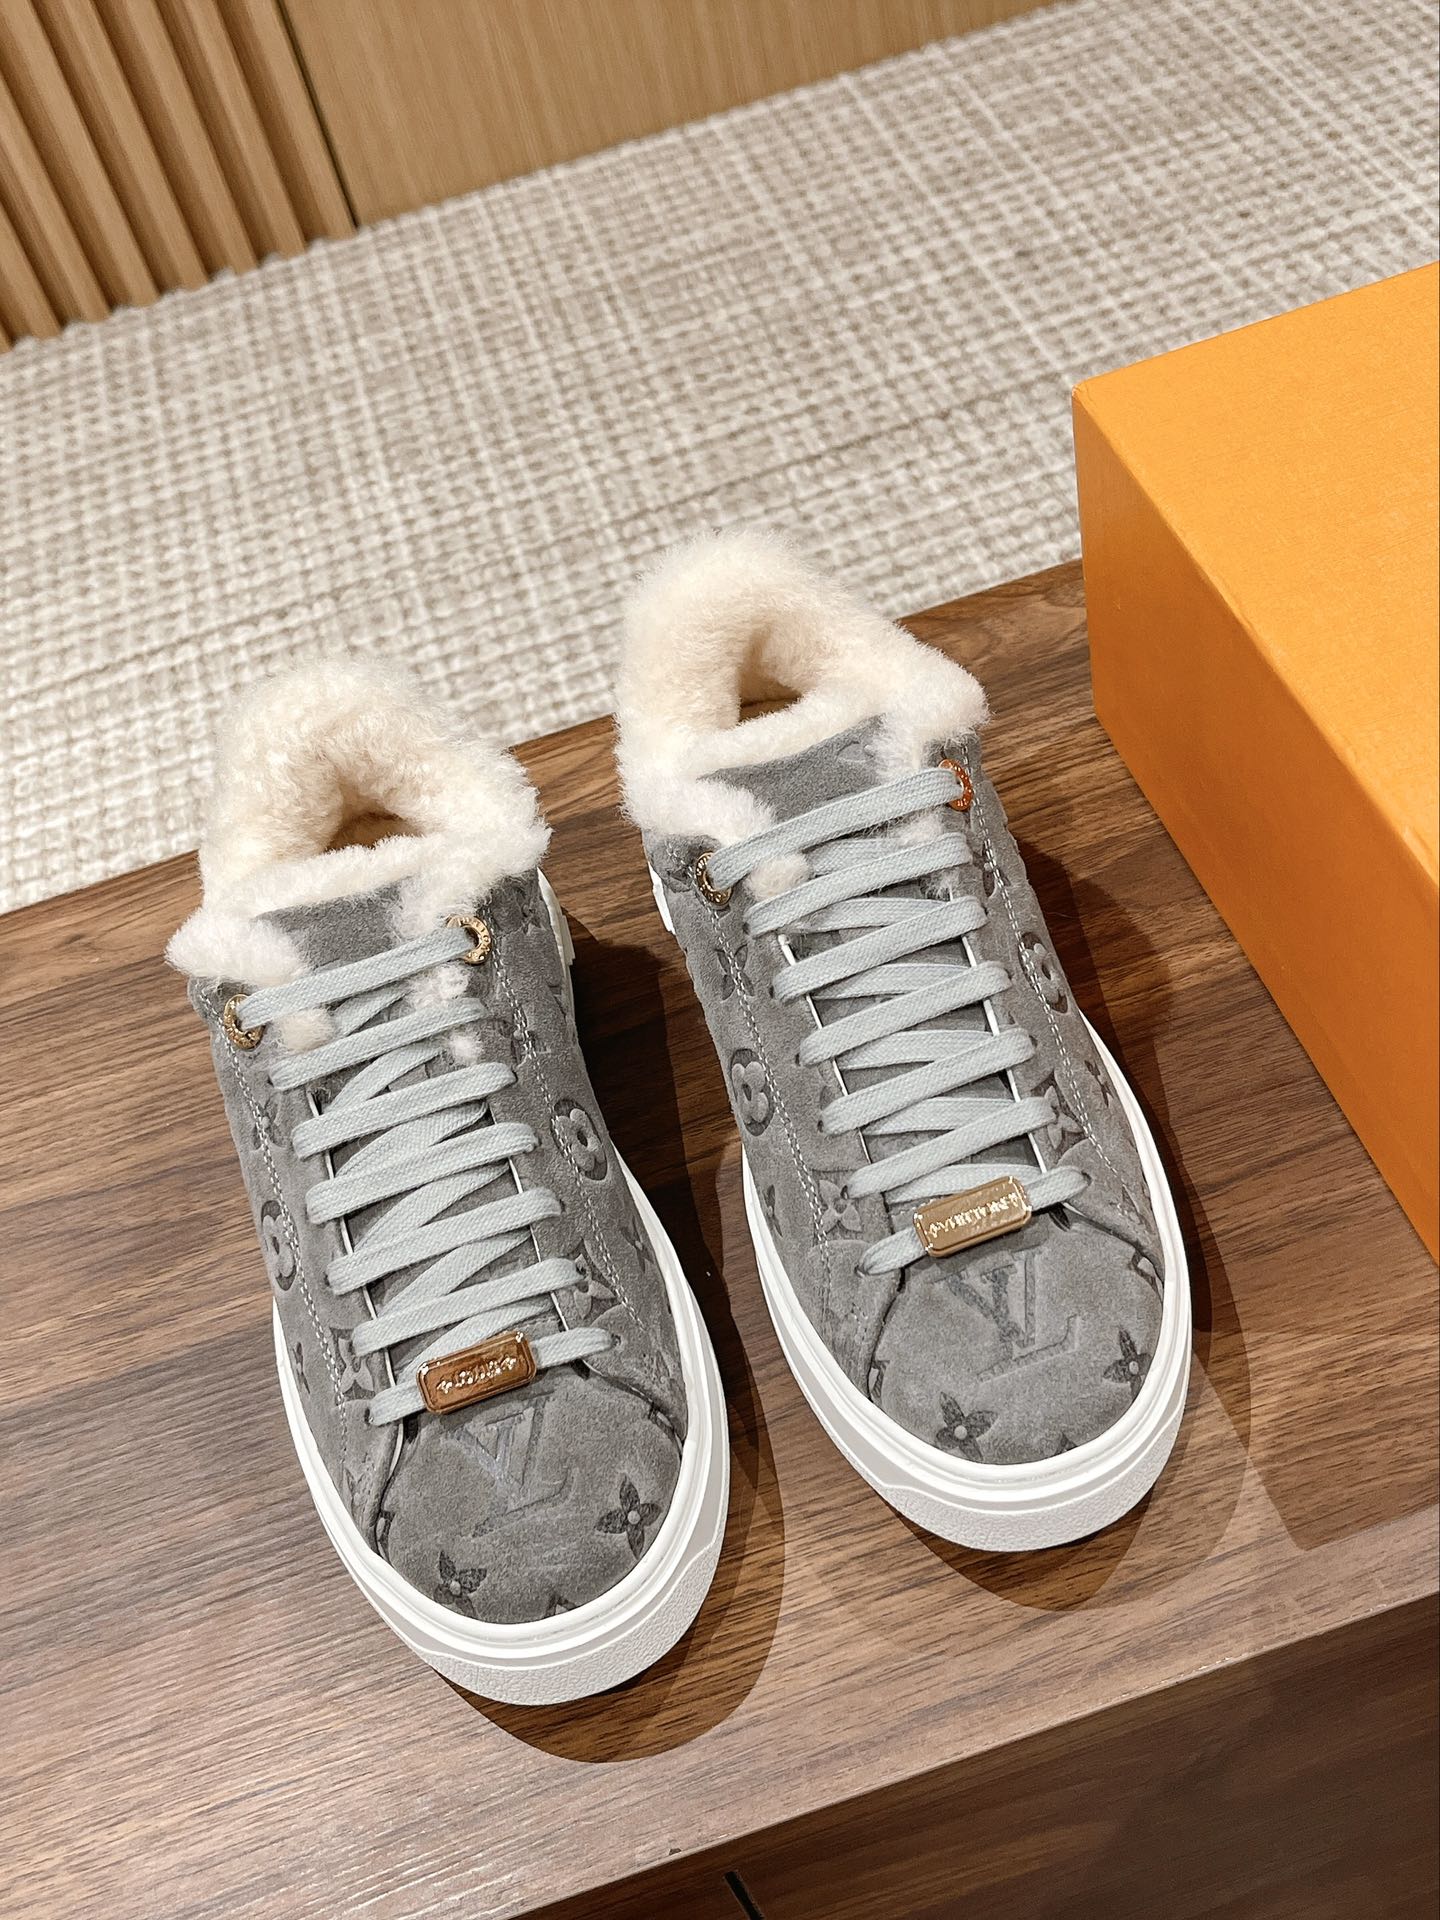 Louis Vuitton Shoes Sneakers Printing Genuine Leather TPU Wool Fall/Winter Collection Sweatpants